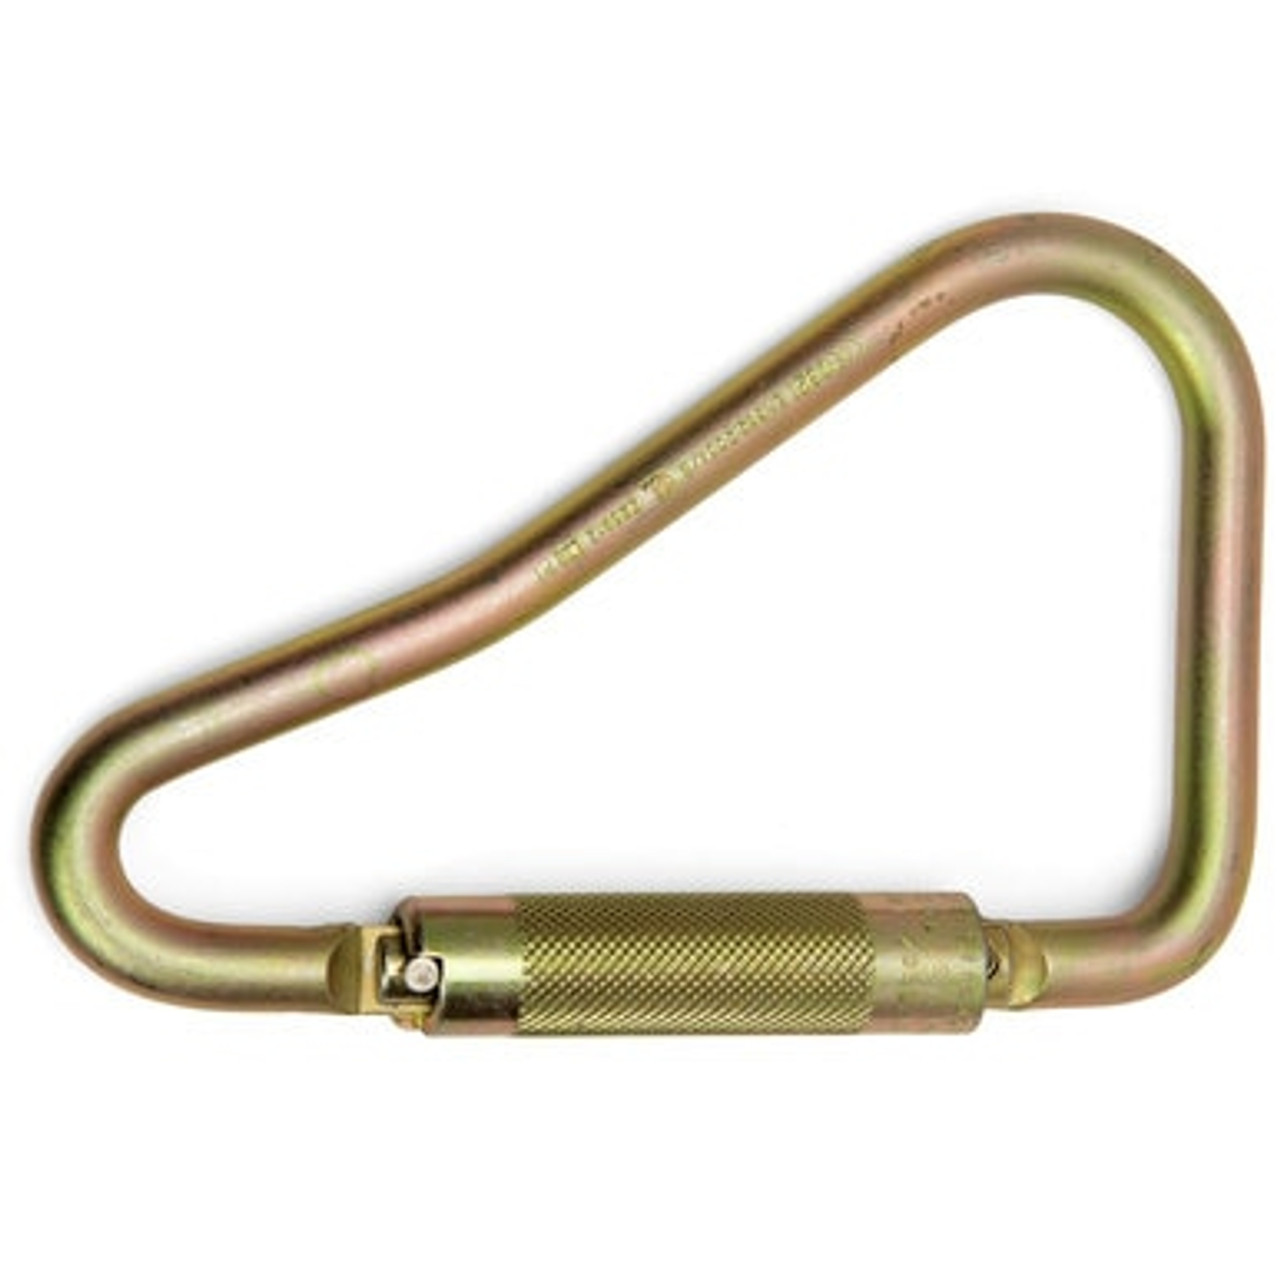 Big Openable Round Carabiner, 35mm